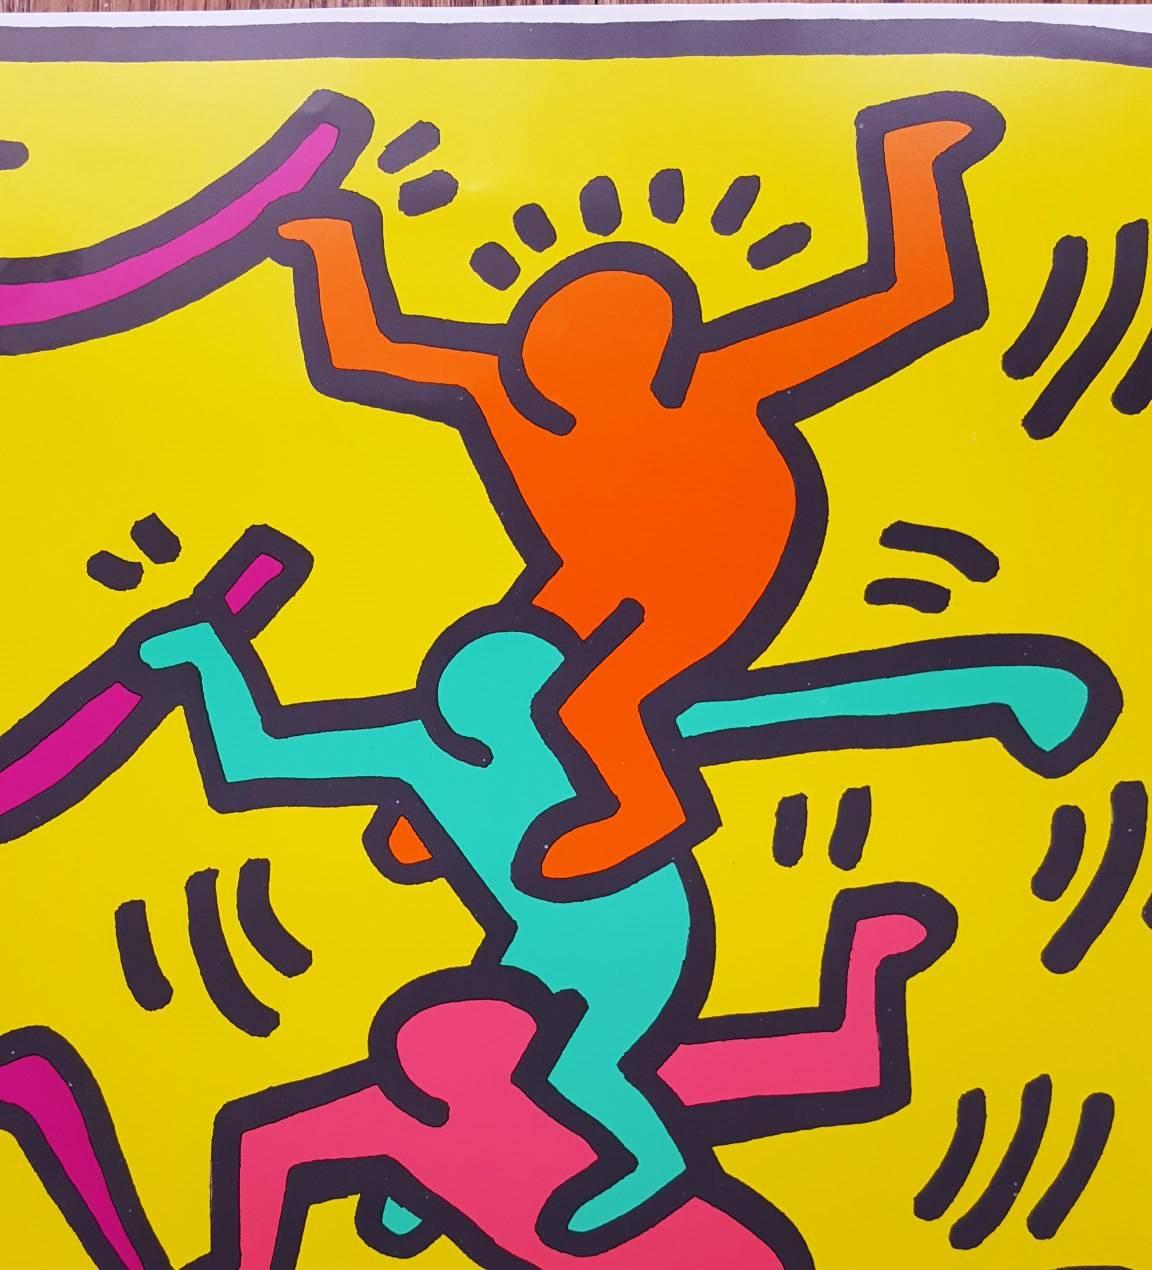 Keith Haring for Emporium Capwell 1